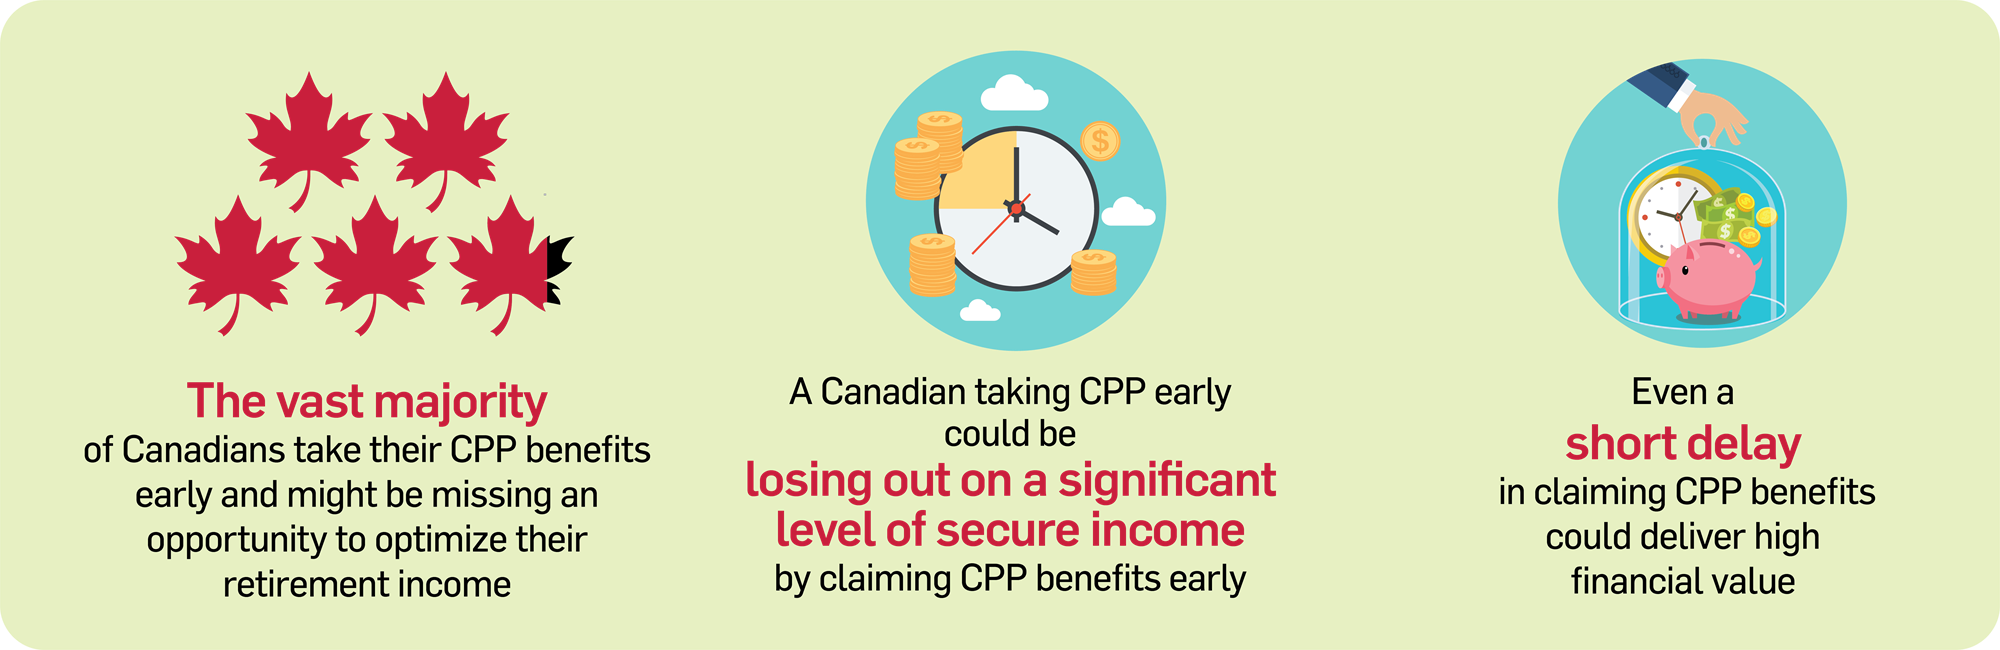 Risks of taking CPP benefits early - losing out on significant level of secure income. Even a short delay in claiming could deliver high value